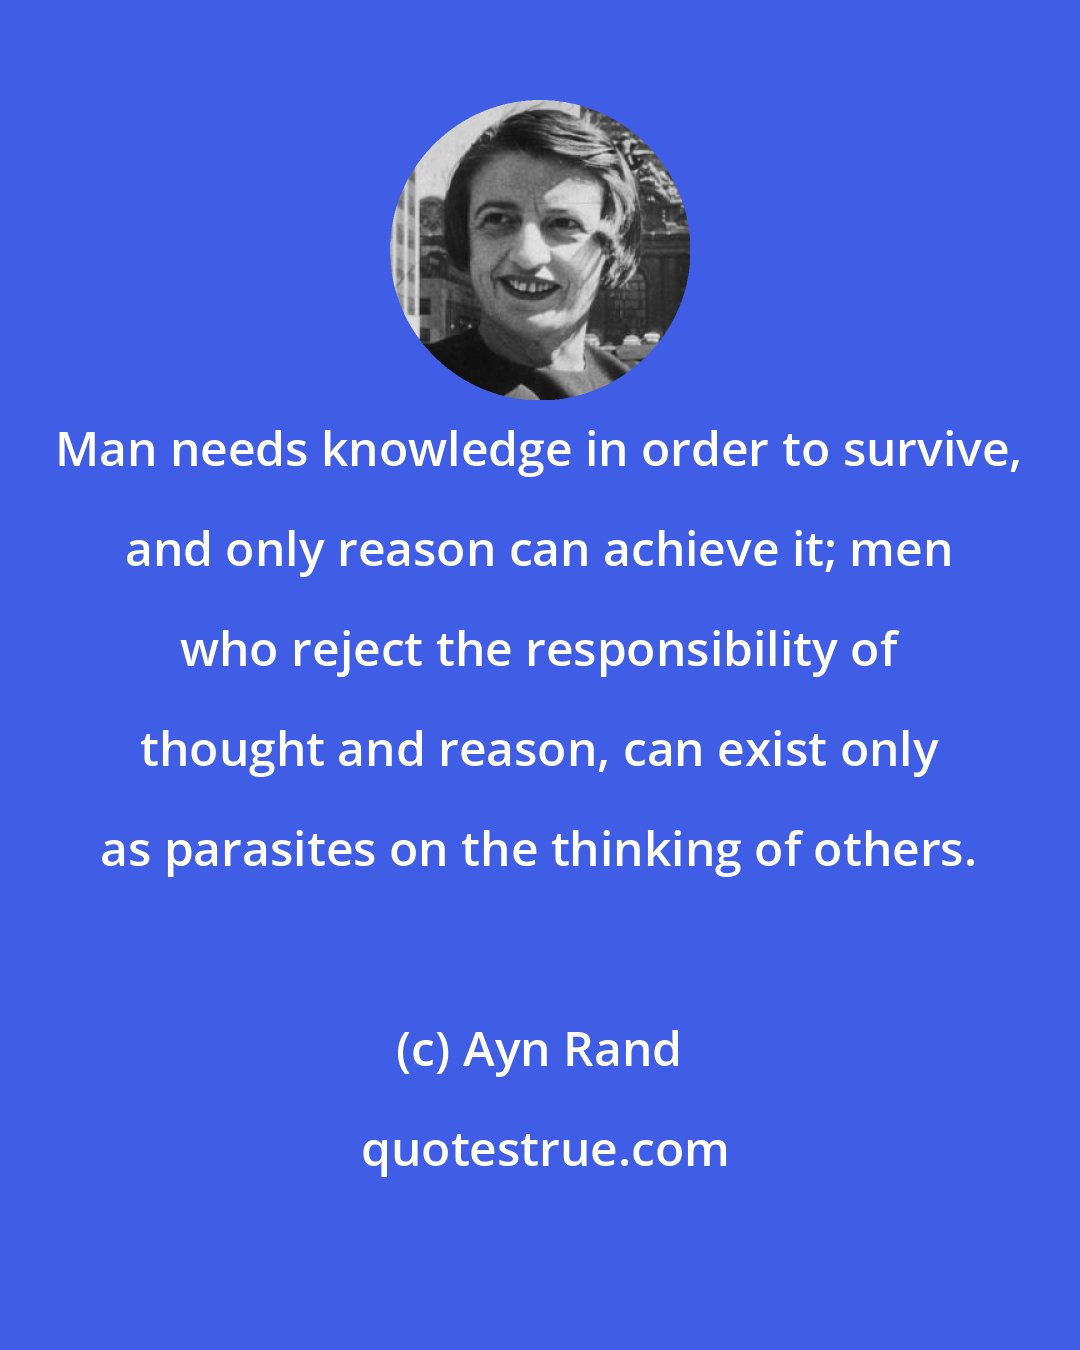 Ayn Rand: Man needs knowledge in order to survive, and only reason can achieve it; men who reject the responsibility of thought and reason, can exist only as parasites on the thinking of others.